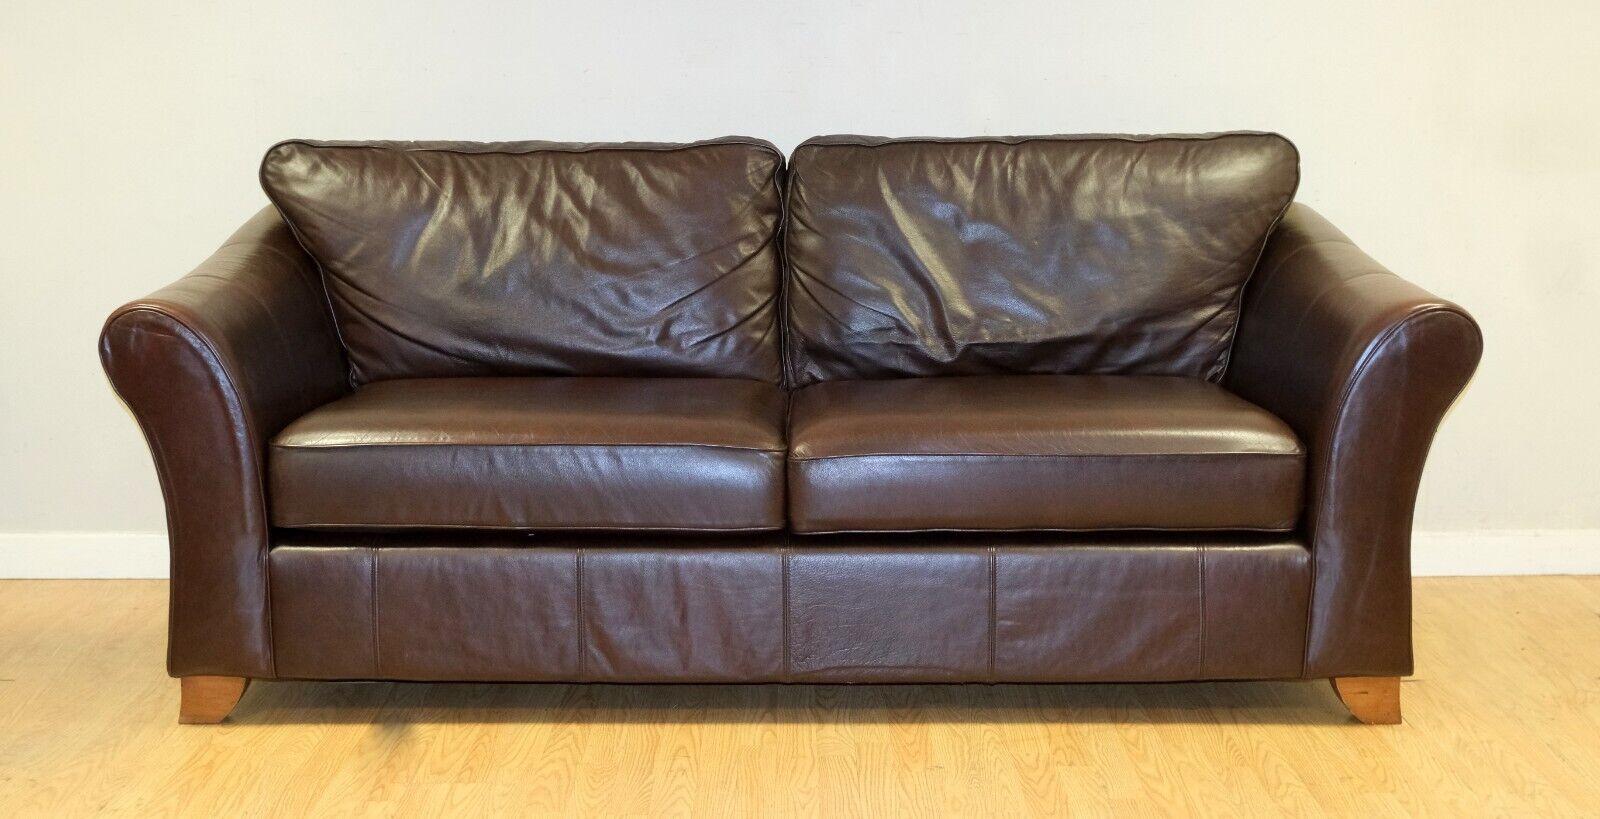 LOVELY MARKS & SPENCER ABBEY BRoWN LEATHER TWO SEATER SOFA ON WOODEN FEET For Sale 6